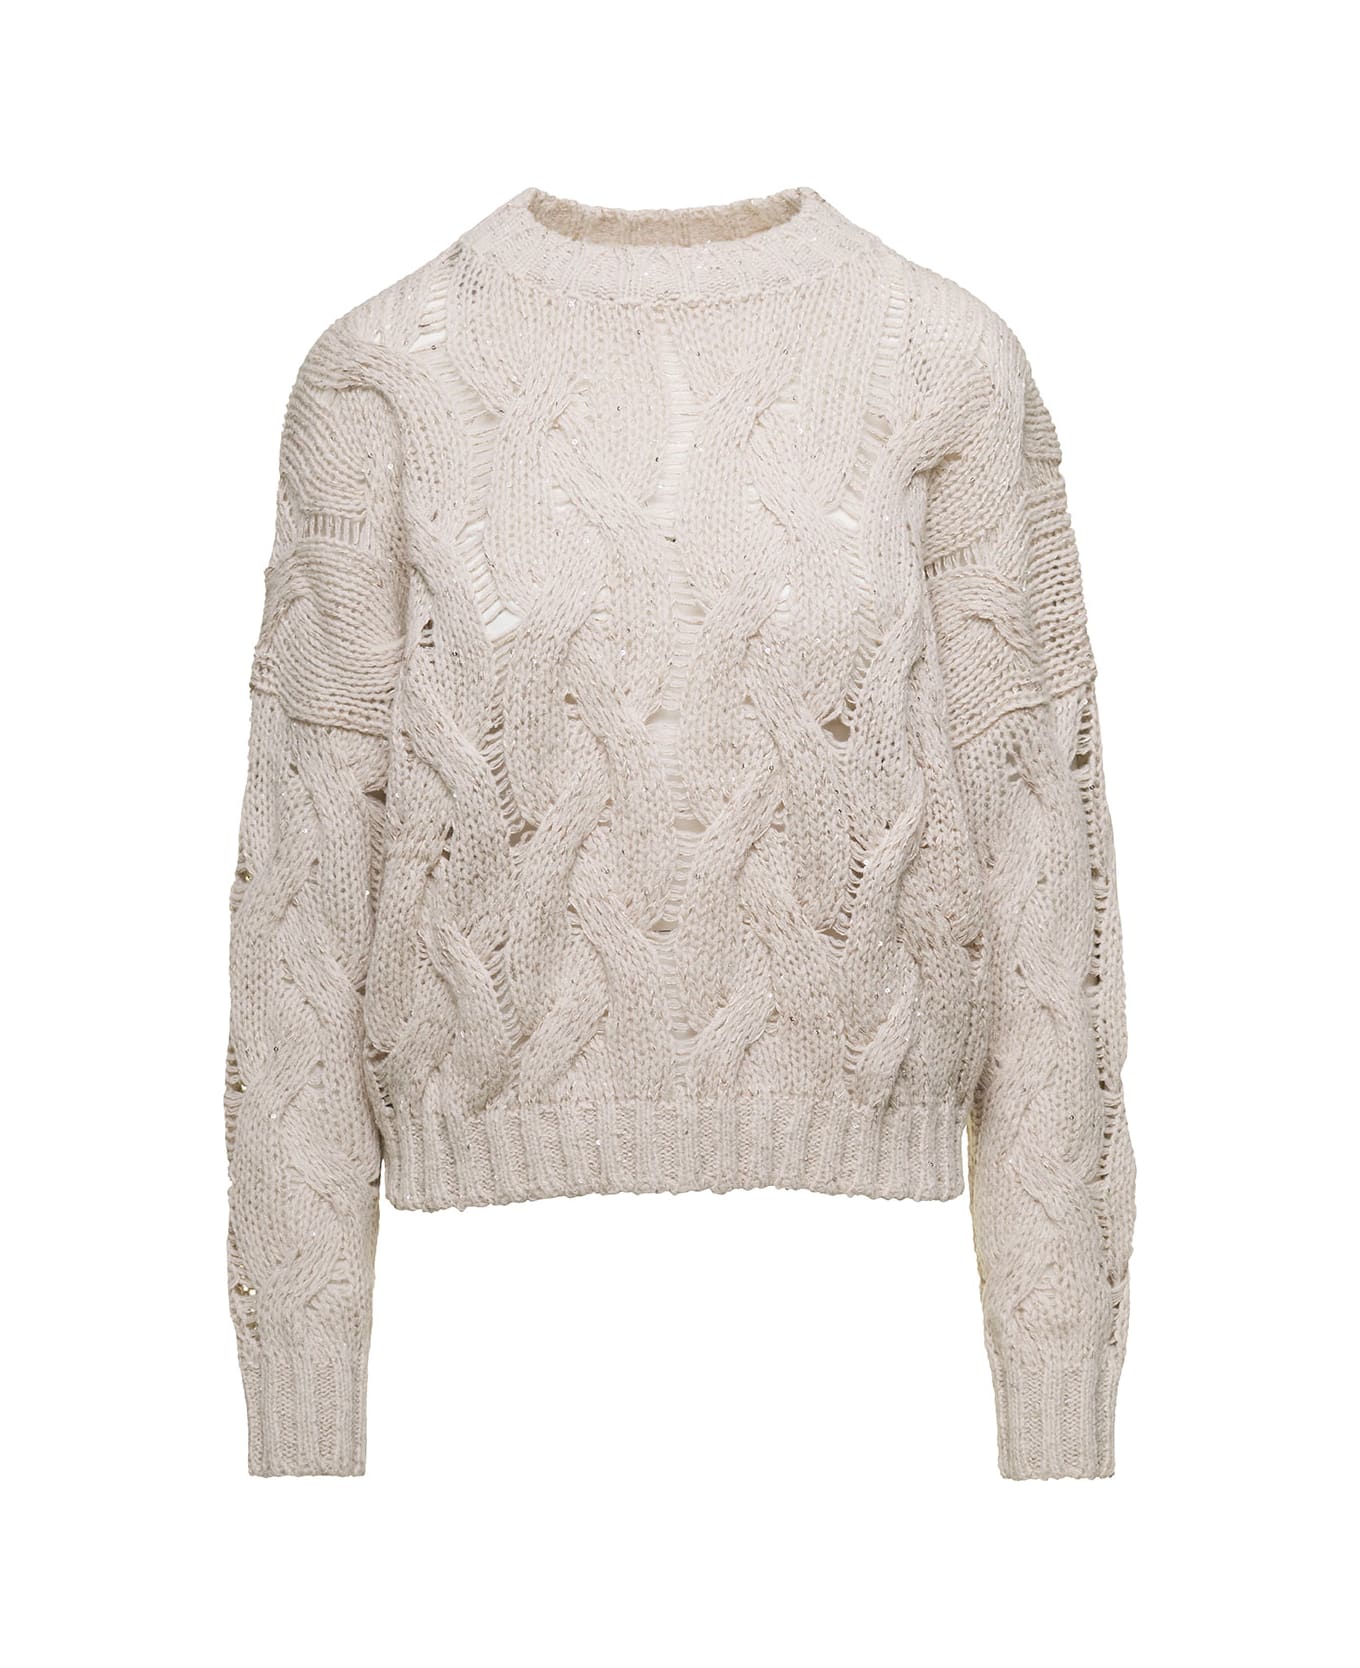 Antonelli 'cremona' Off-white Cable-knit Crewneck Sweater With Micro Paillettes In Wool Blend Woman - Beige